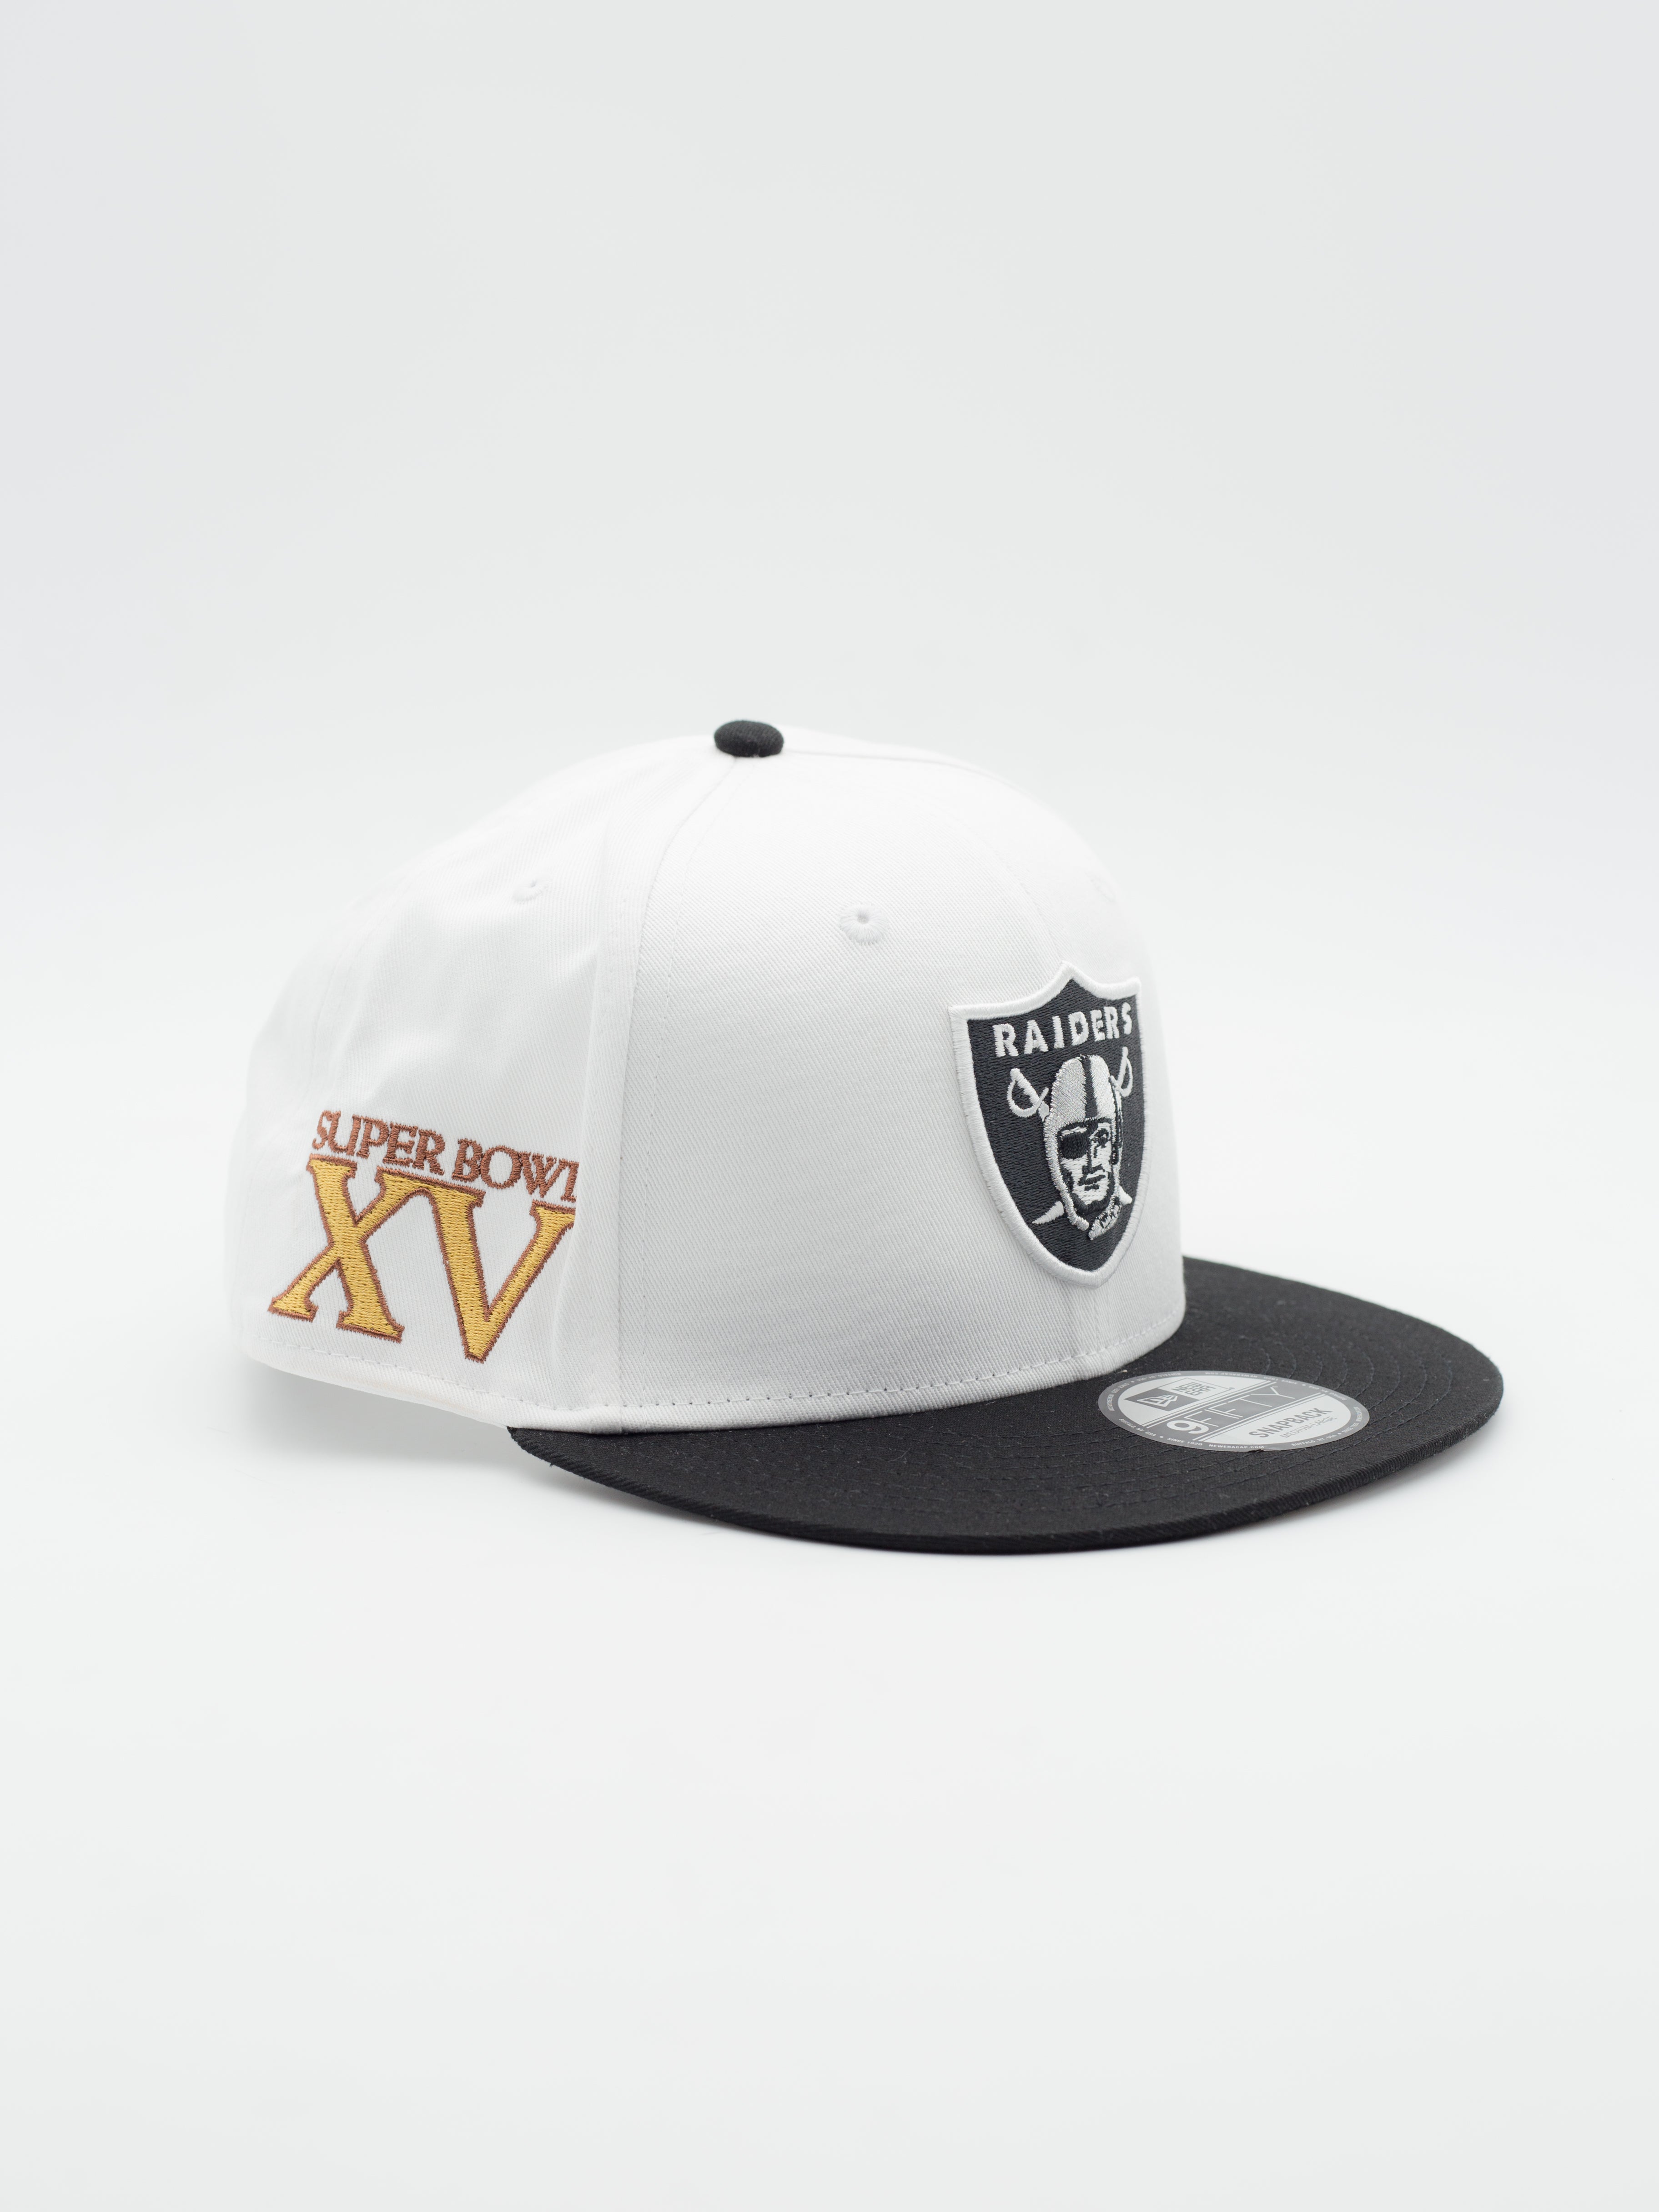 9FIFTY Crown Patches Las Vegas Raiders Snapback